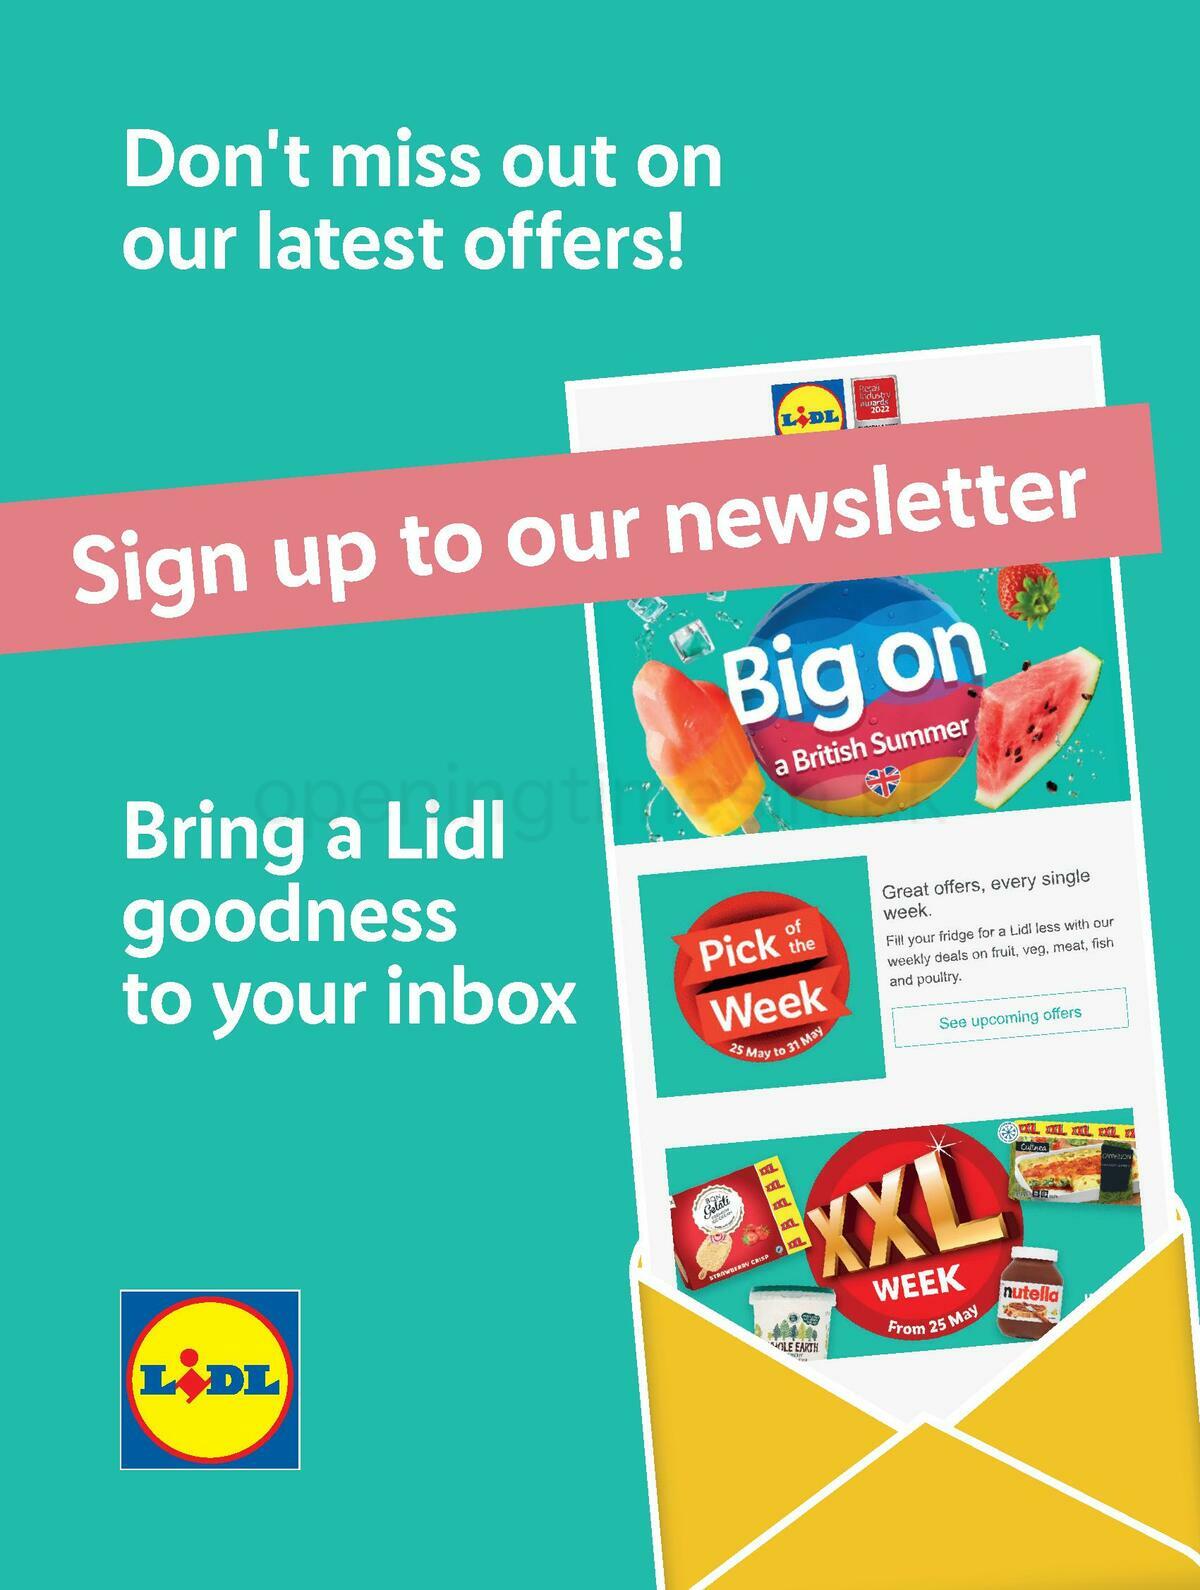 LIDL Offers from 8 June